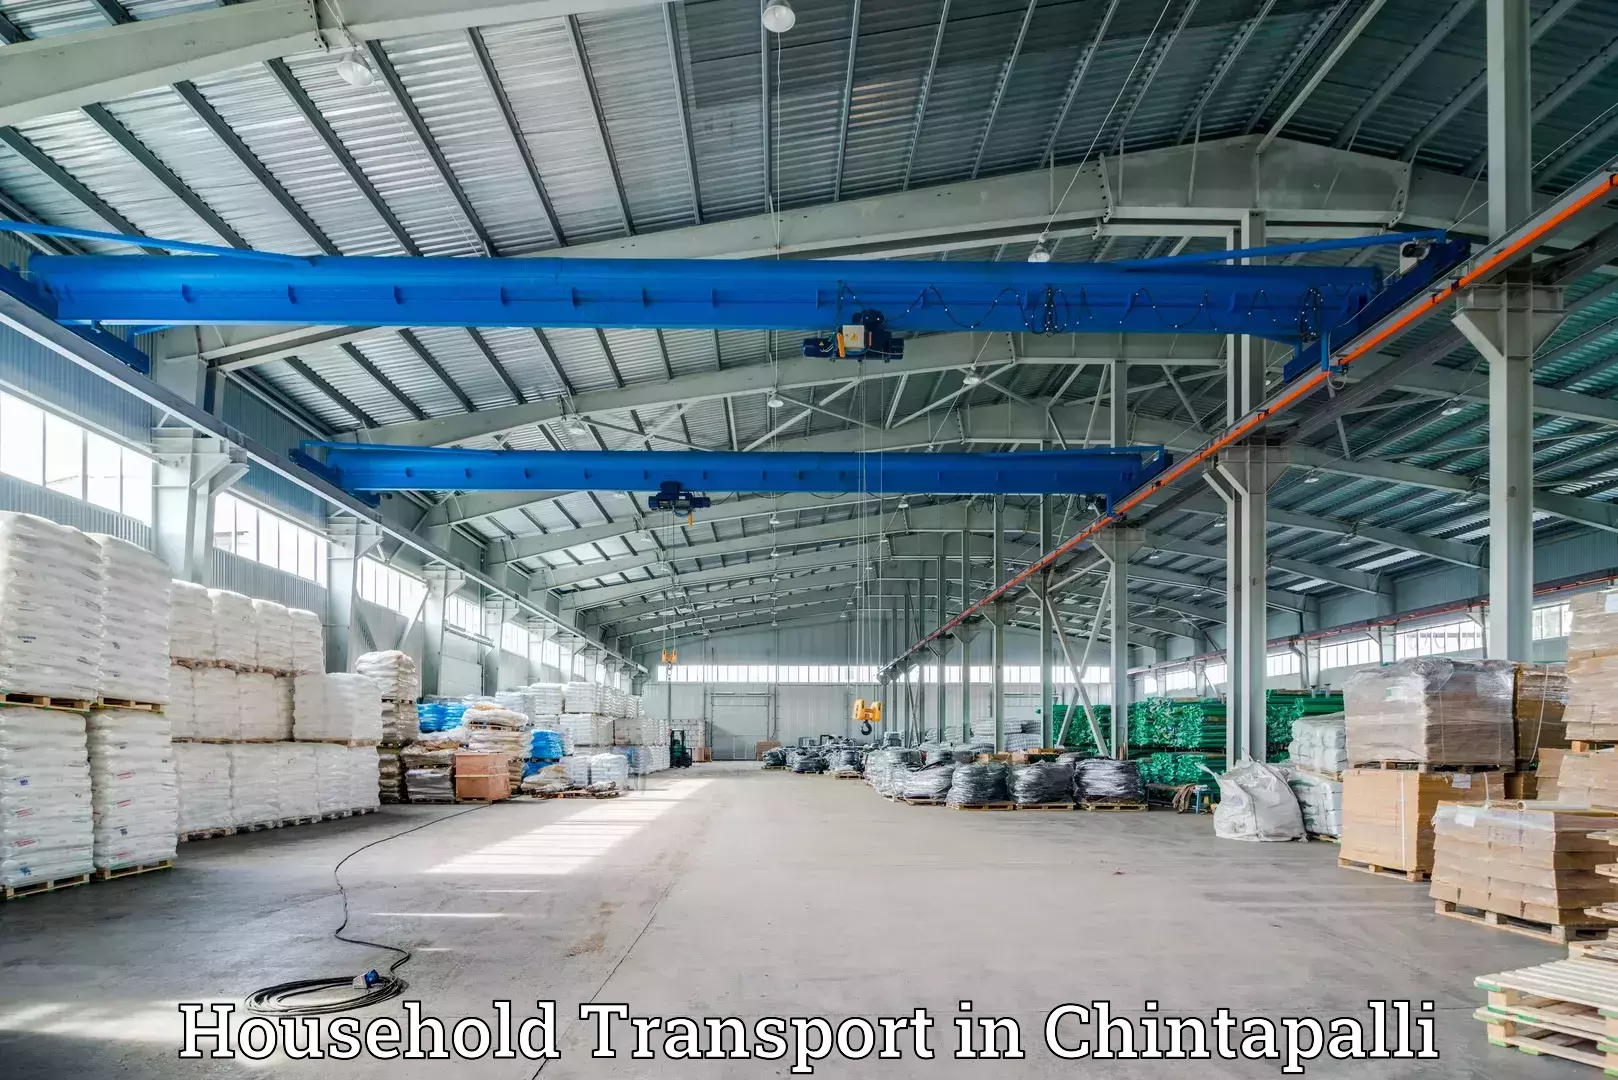 Skilled furniture transport in Chintapalli